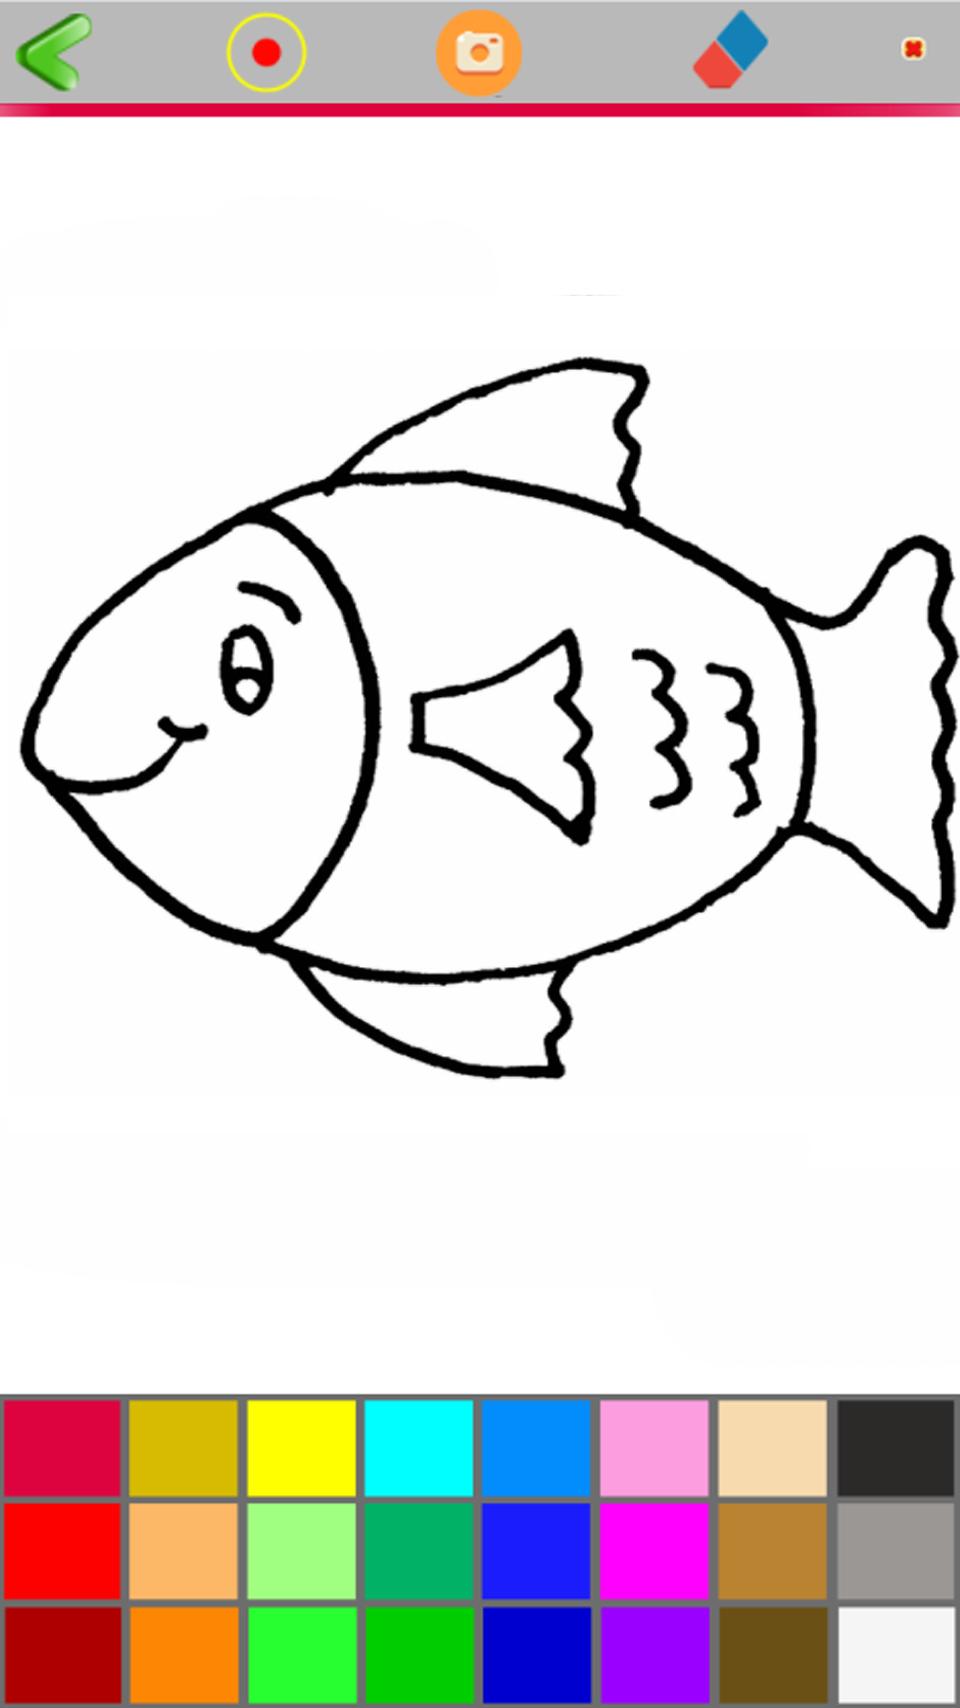 Little Fish Coloring Book For Kids For Android Apk Download